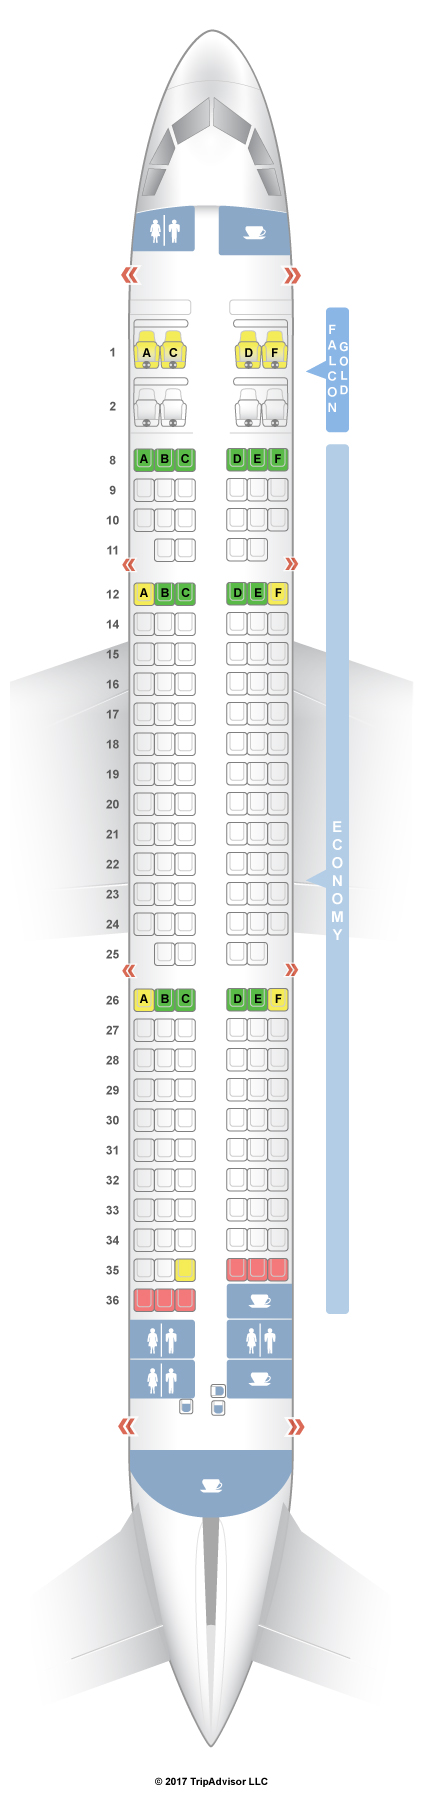 seat selection gulf air